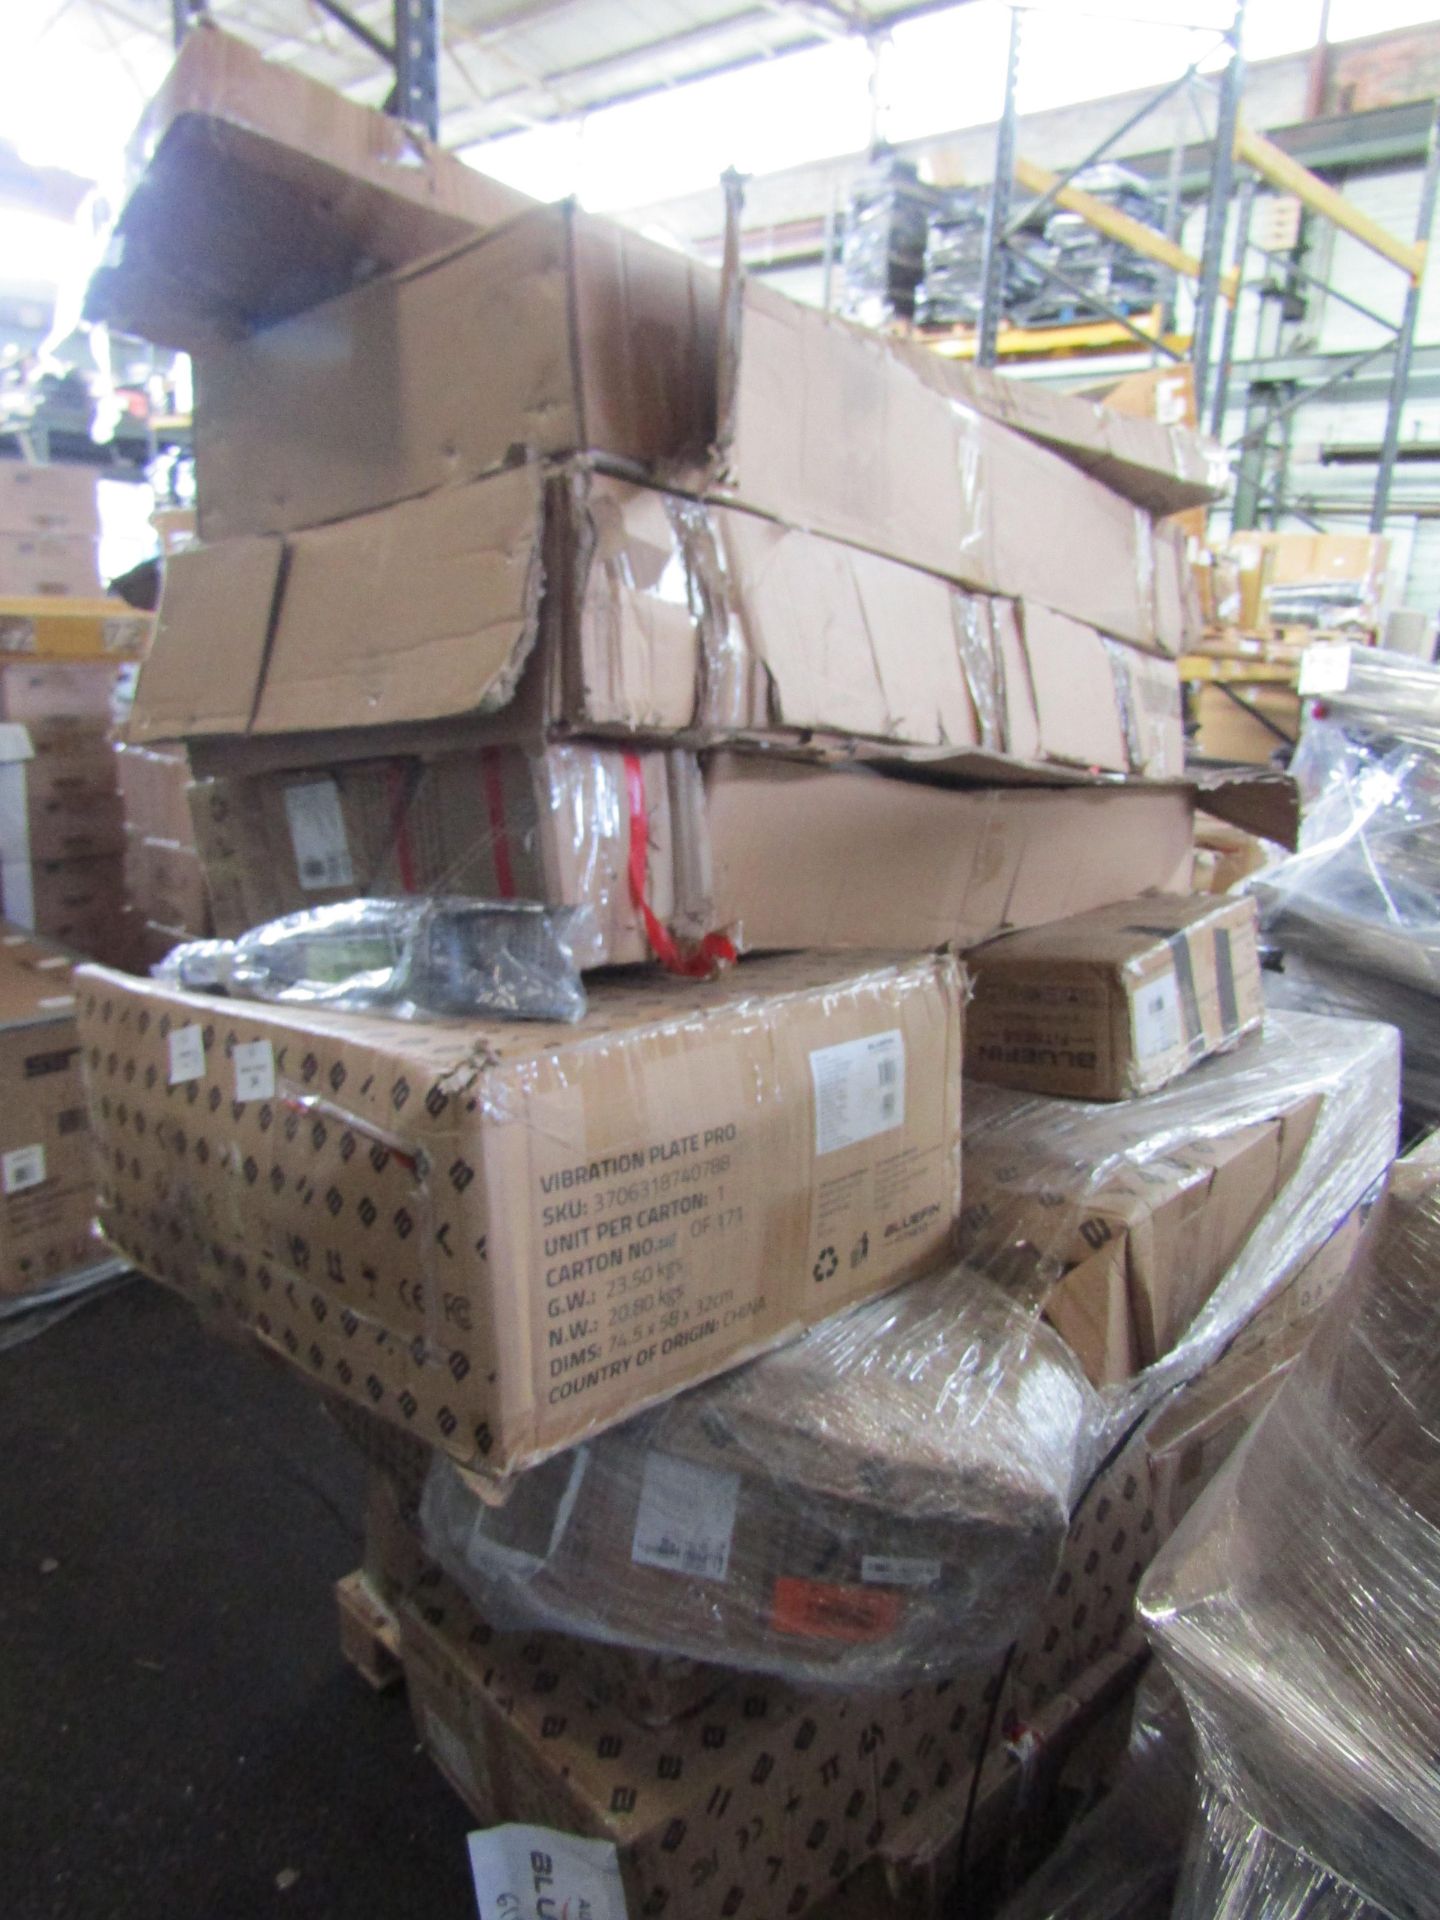 Pallet of approx 14 various Bluefin fitness returns includes vibe plates, rowing machines and more